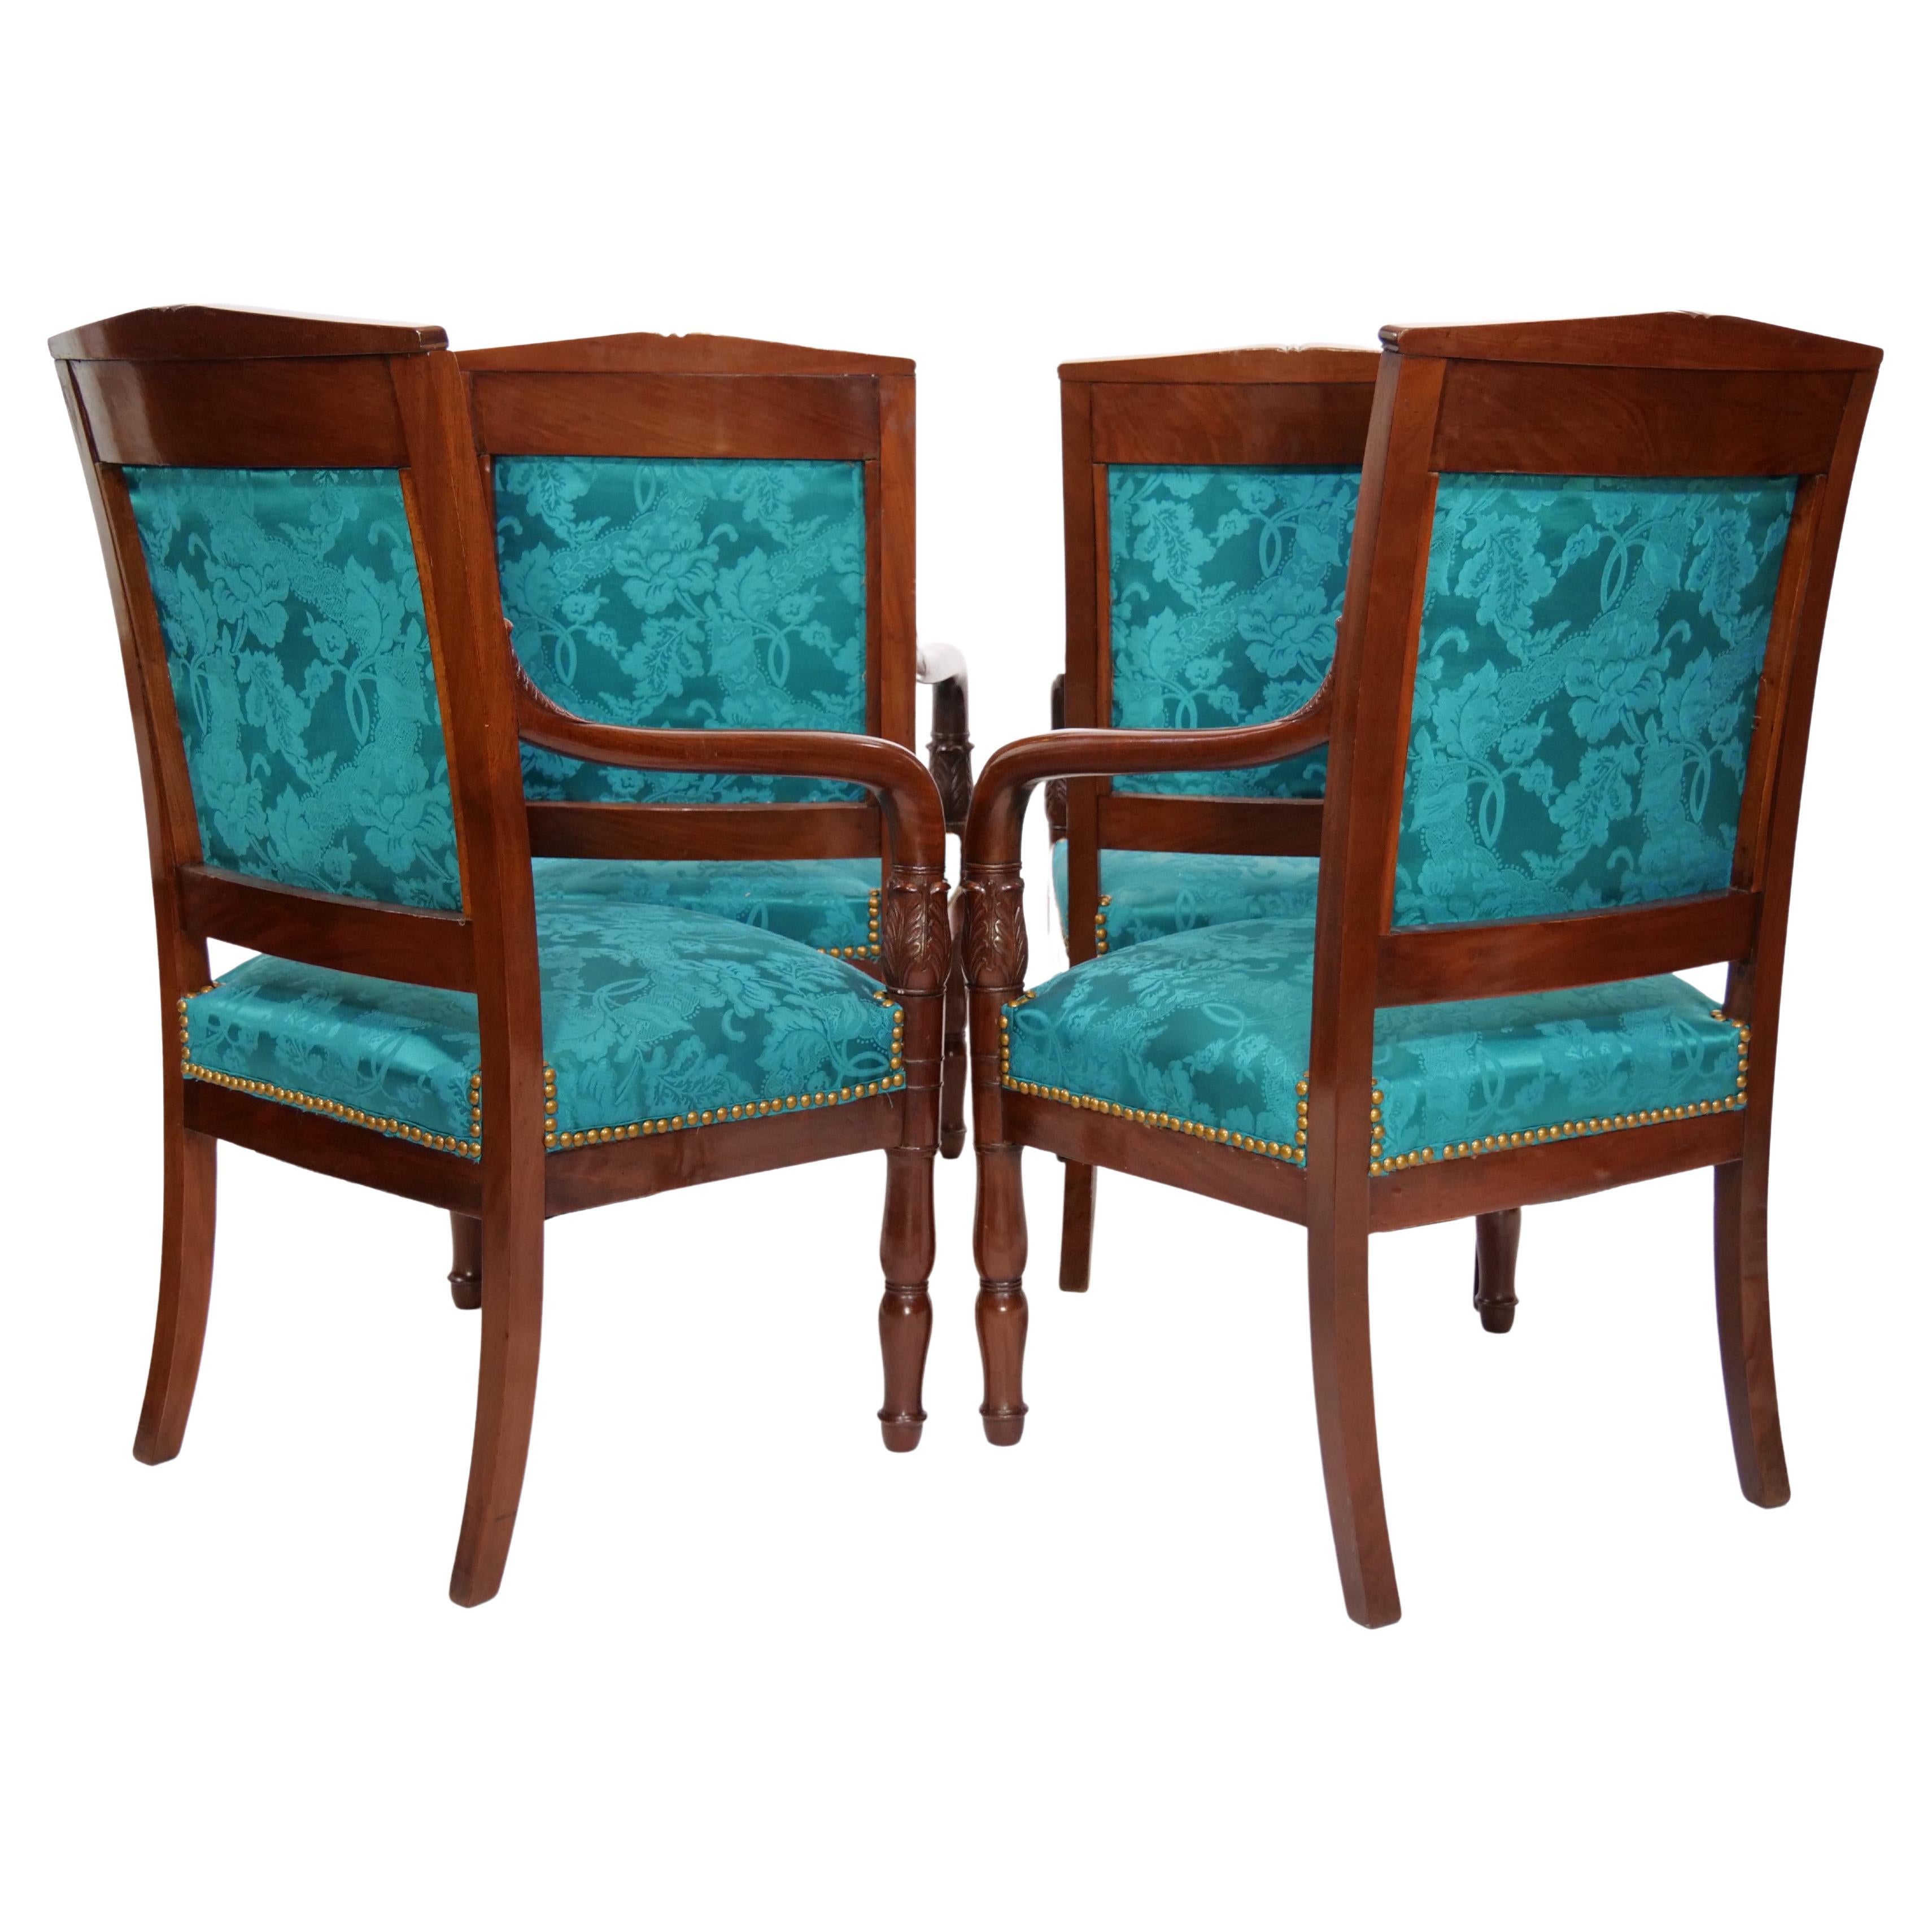 Late 19th Century 19th Century Mahogany Wood Framed / Upholstered Armchair Set For Sale